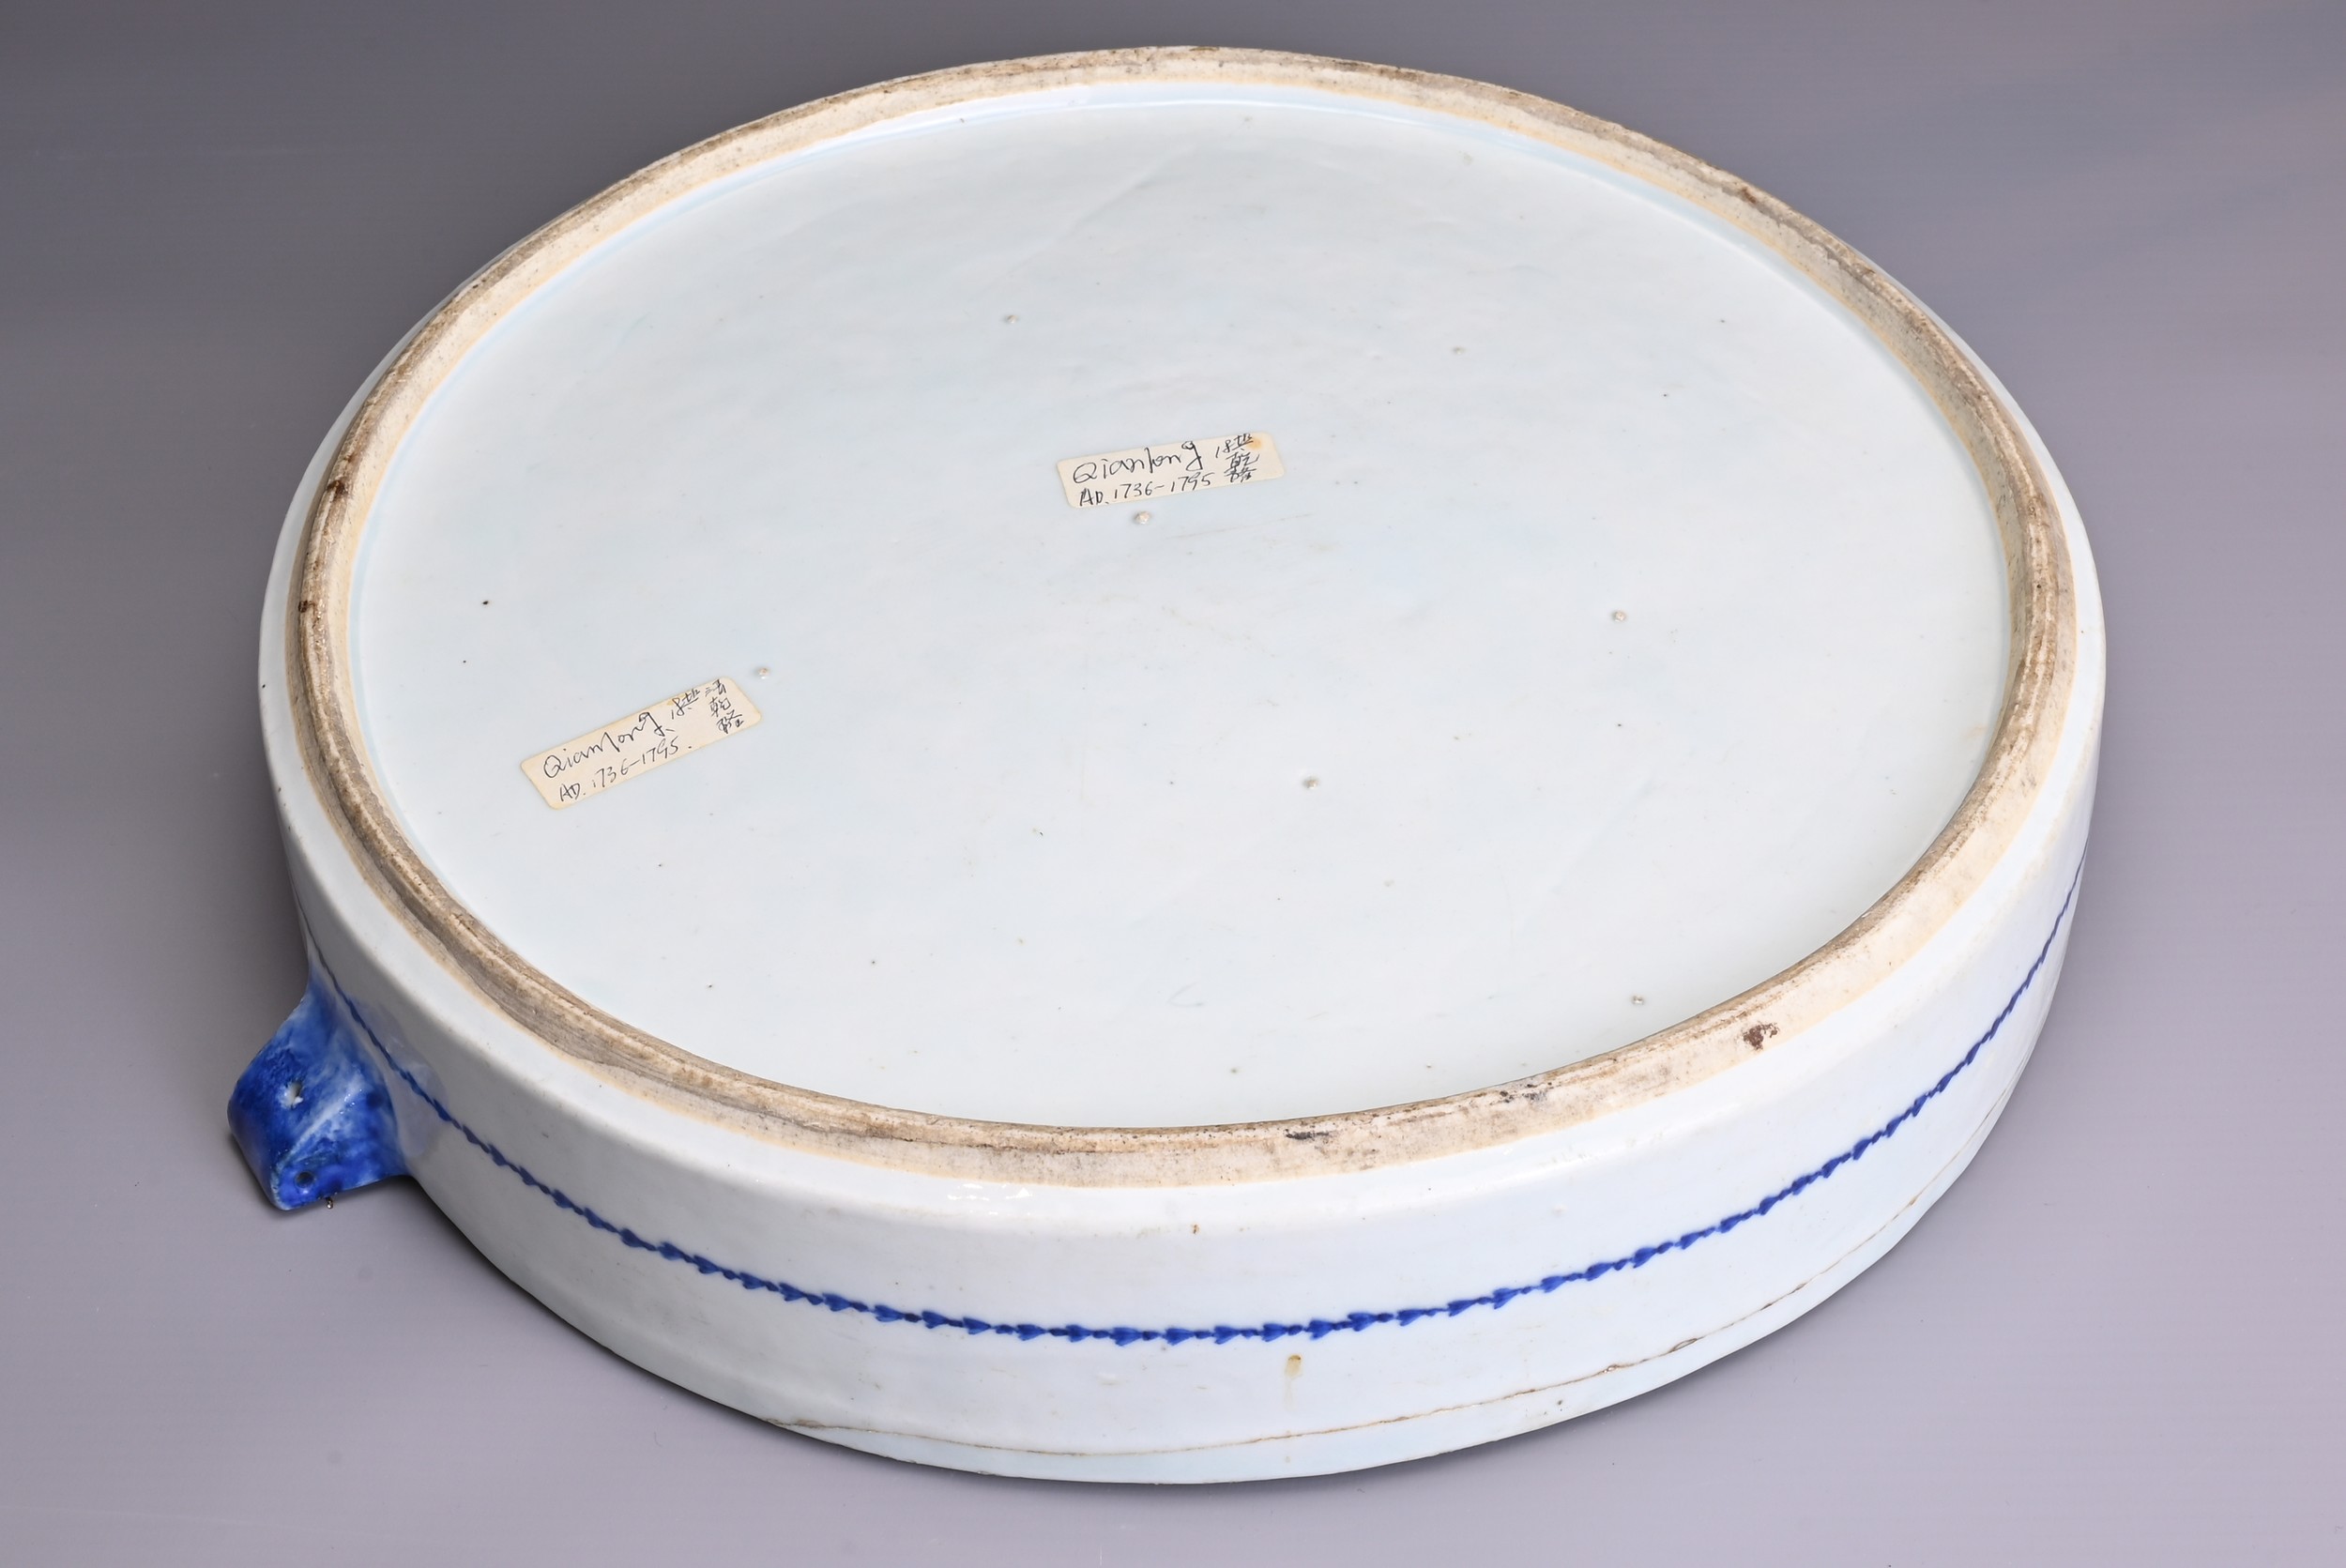 A LARGE CHINESE BLUE AND WHITE PORCELAIN WARMING DISH, 18TH CENTURY. Minimally decorated with - Image 6 of 6